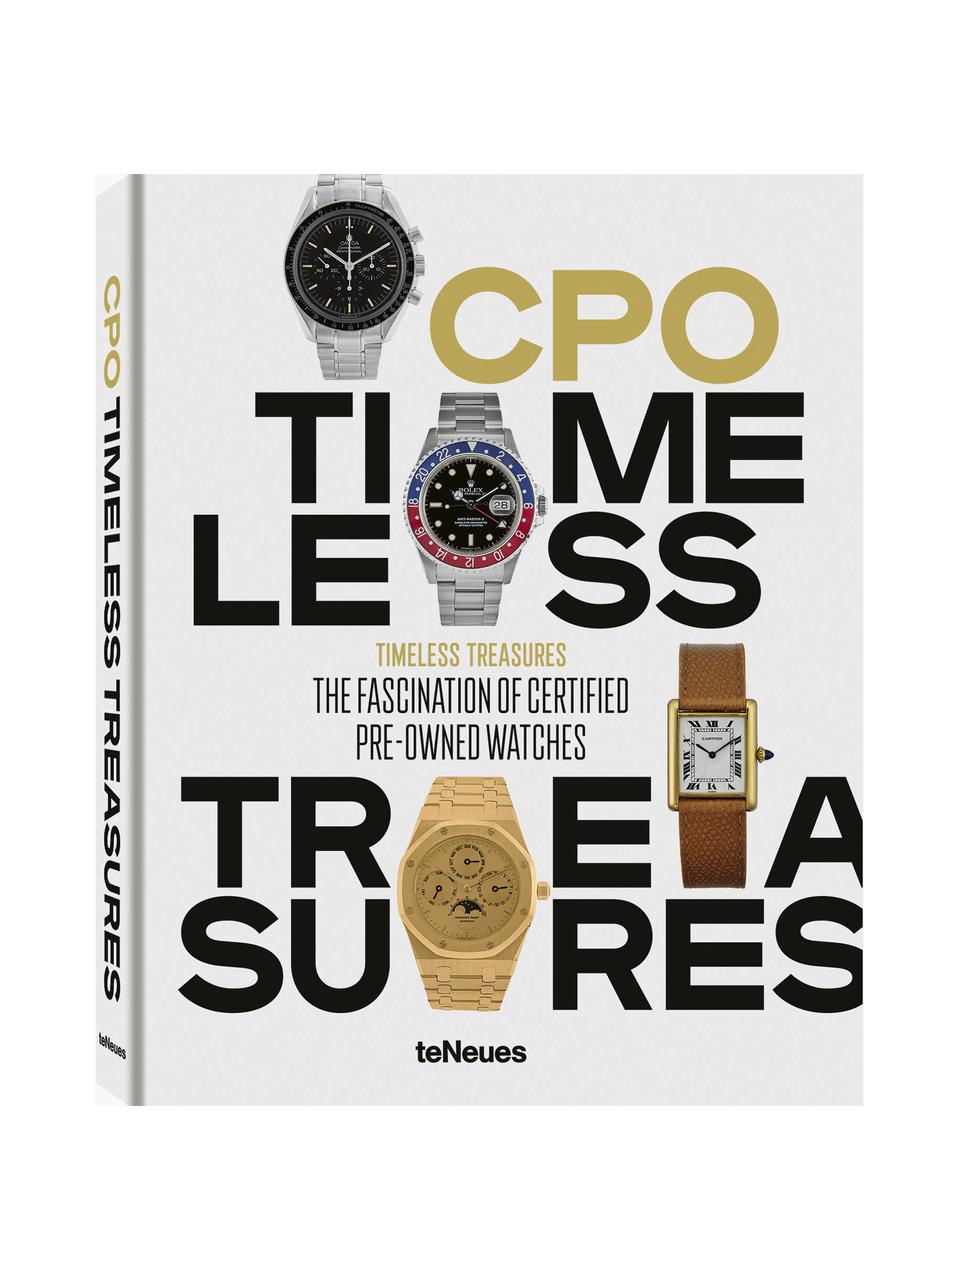 Libro ilustrado Timeless Treasures - The Fascination of Certified Pre-Owned Watches, Papel, Timeless Treasures, An 25 x Al 32 cm